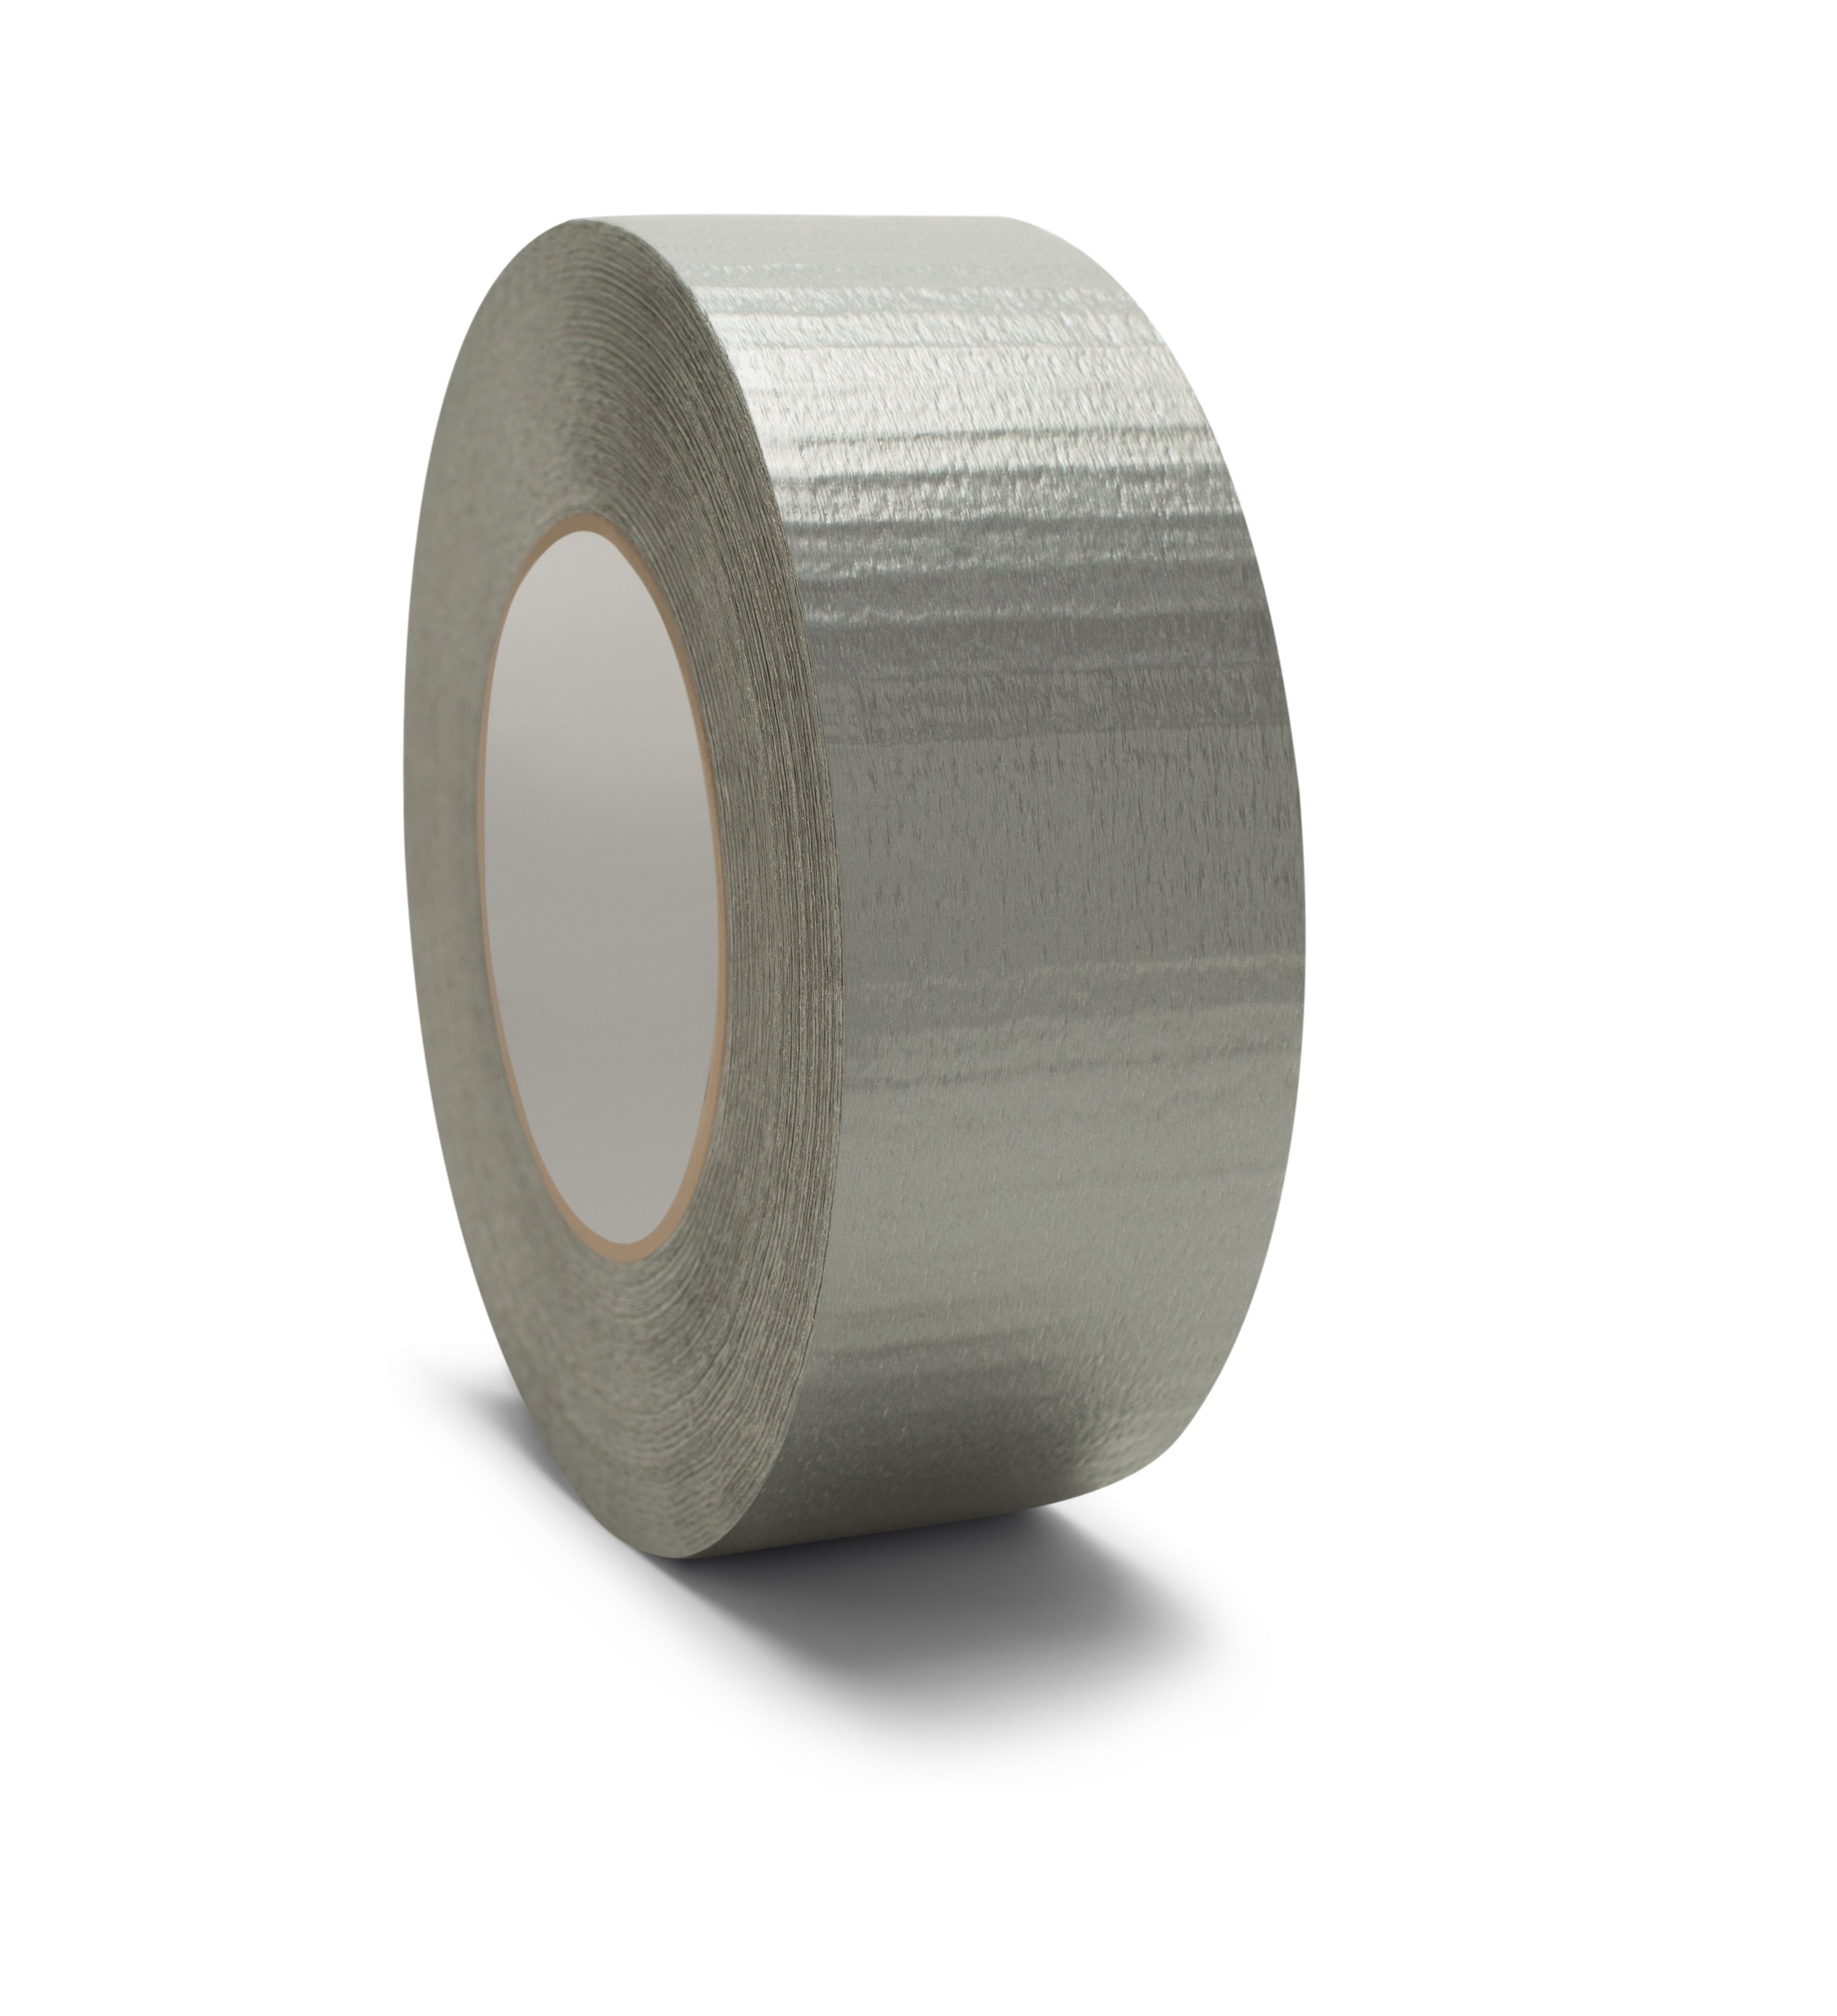 12 Rolls 2 Inch x 60 Yards Silver Duct Tape 7 Mil Utility Grade Adhesive Tapes 